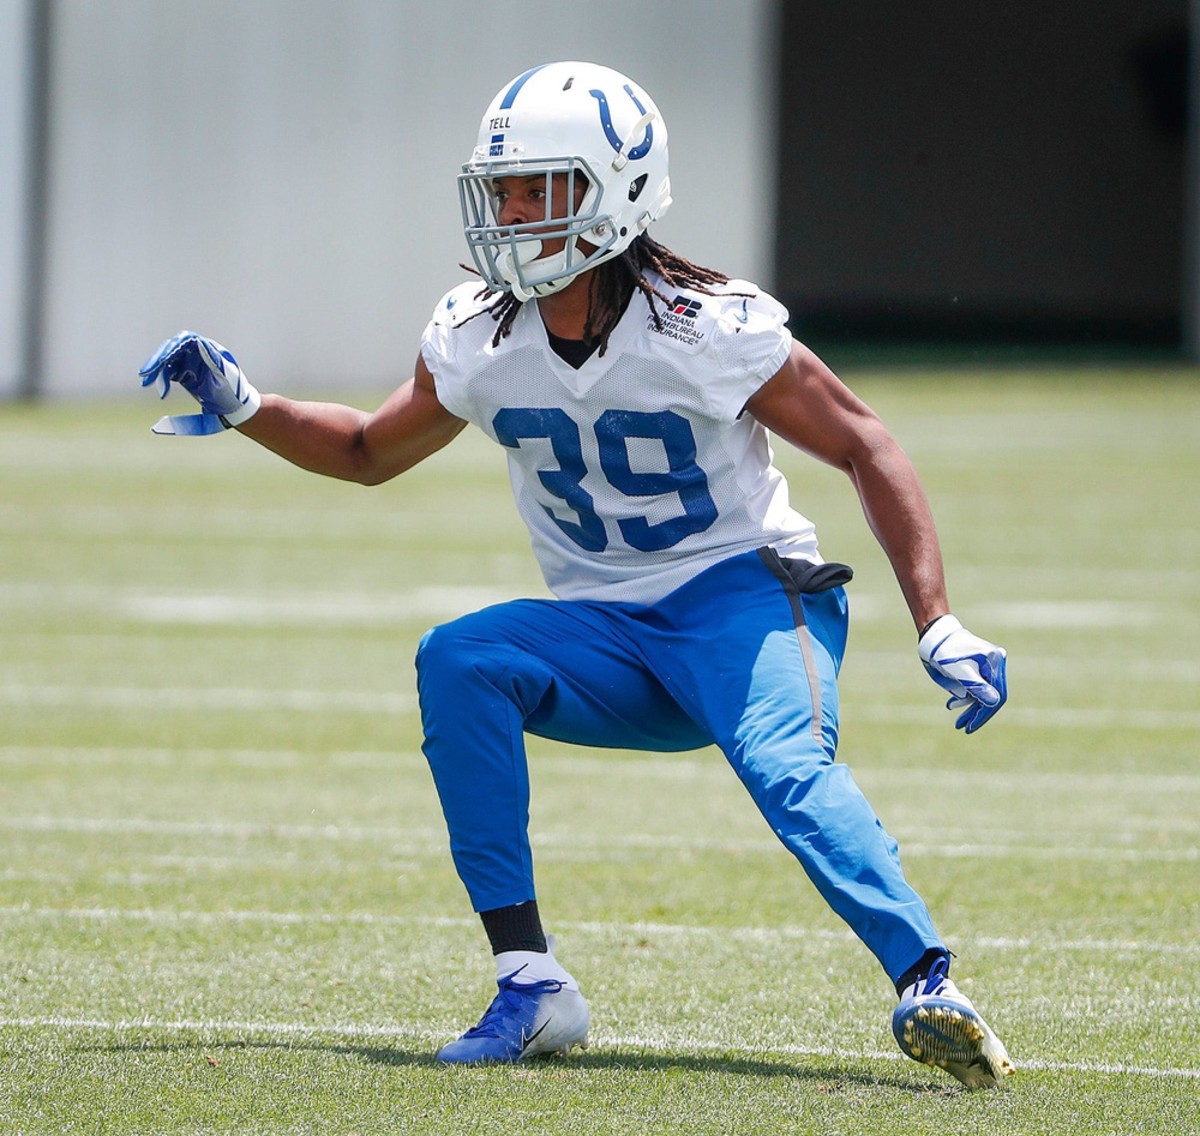 Second-year Indianapolis Colts cornerback Marvell Tell III has decided to opt-out on the 2020 NFL season.